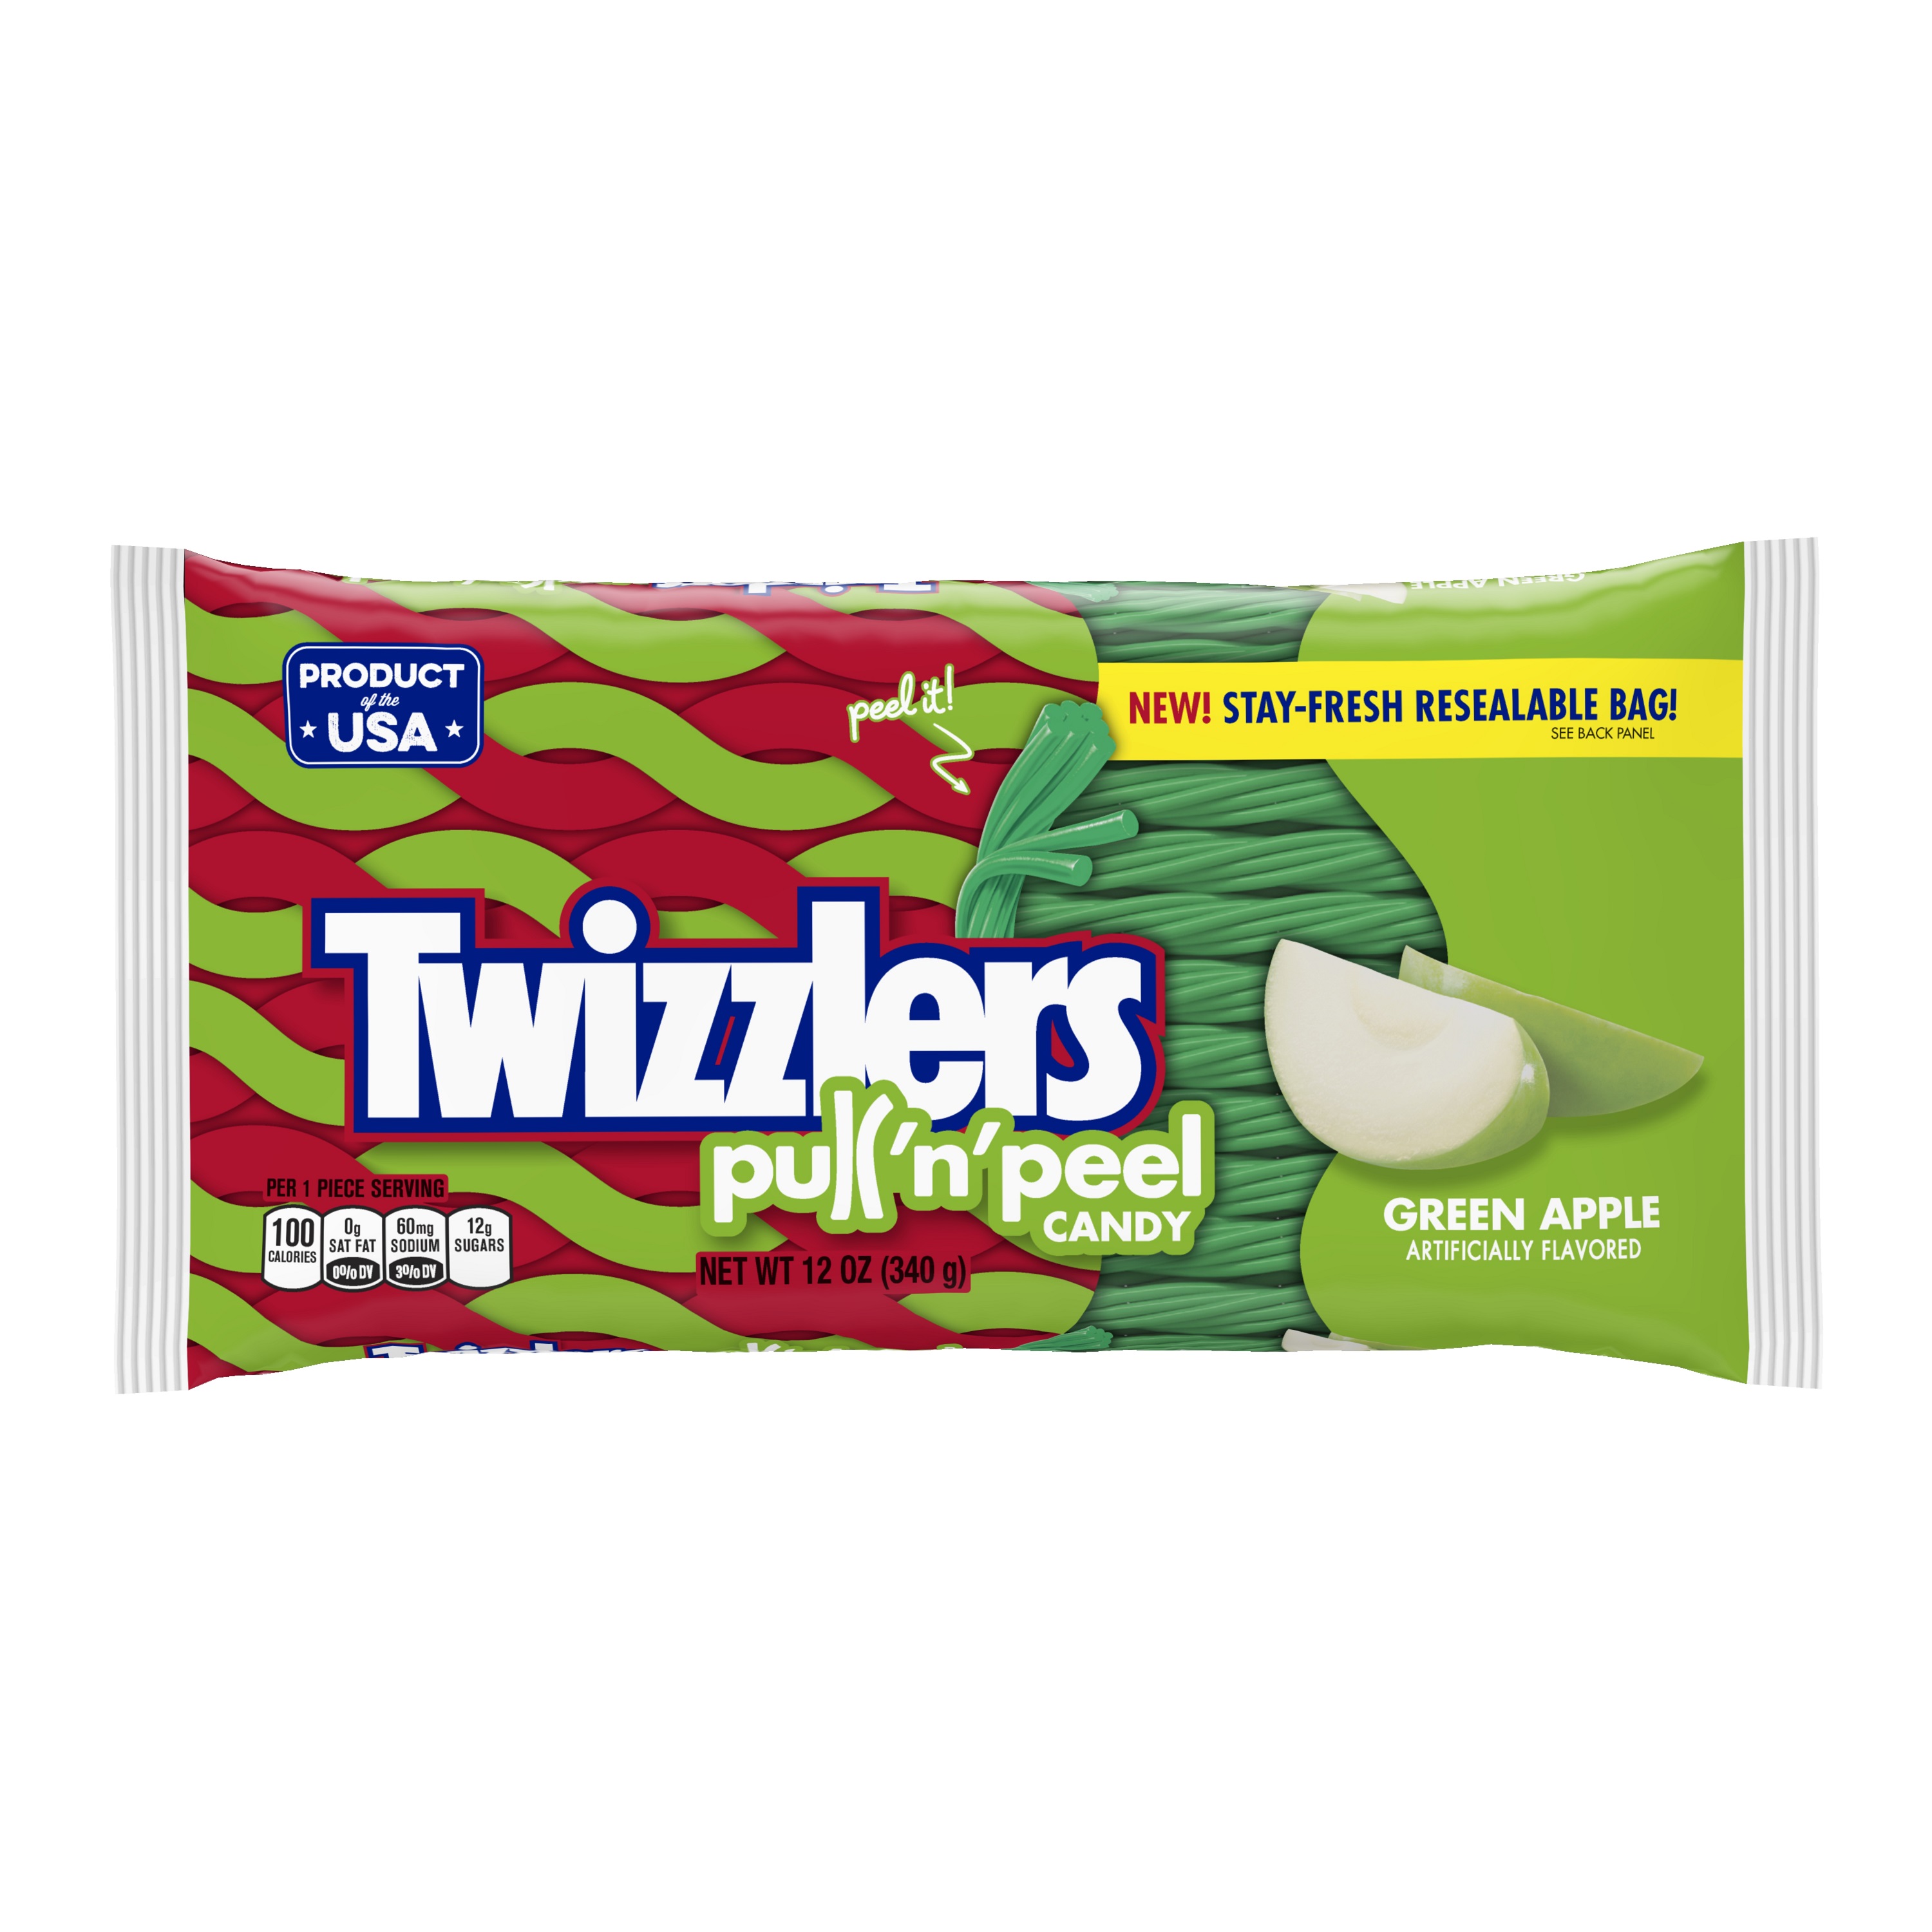 Twizzlers Pull 'n' Peel Green Apple Flavored Chewy Candy, 12 Oz. - image 1 of 3